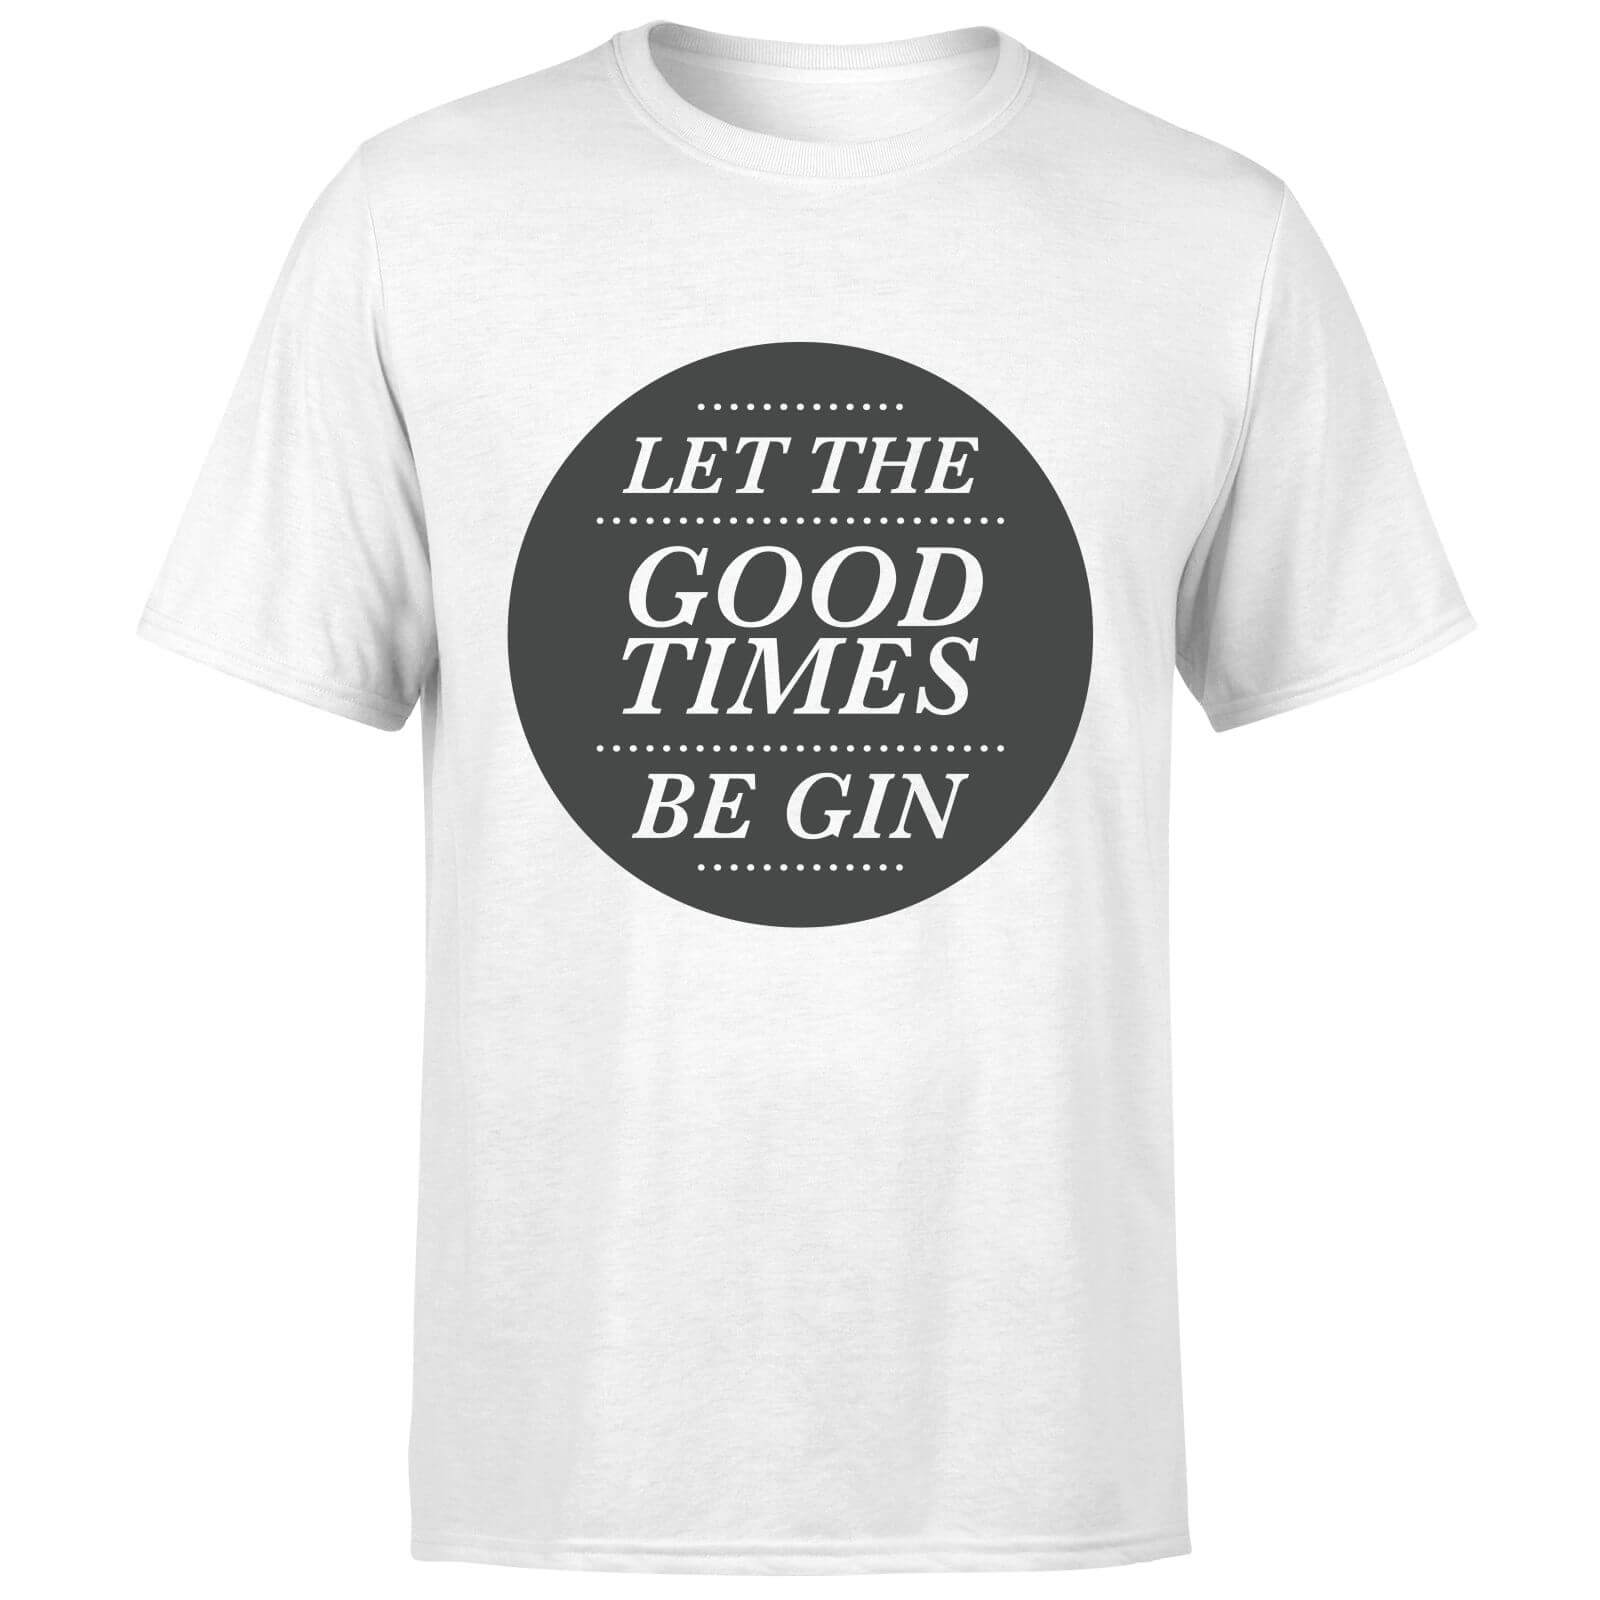 Let the Good Times Be Gin T-Shirt - White - S - White